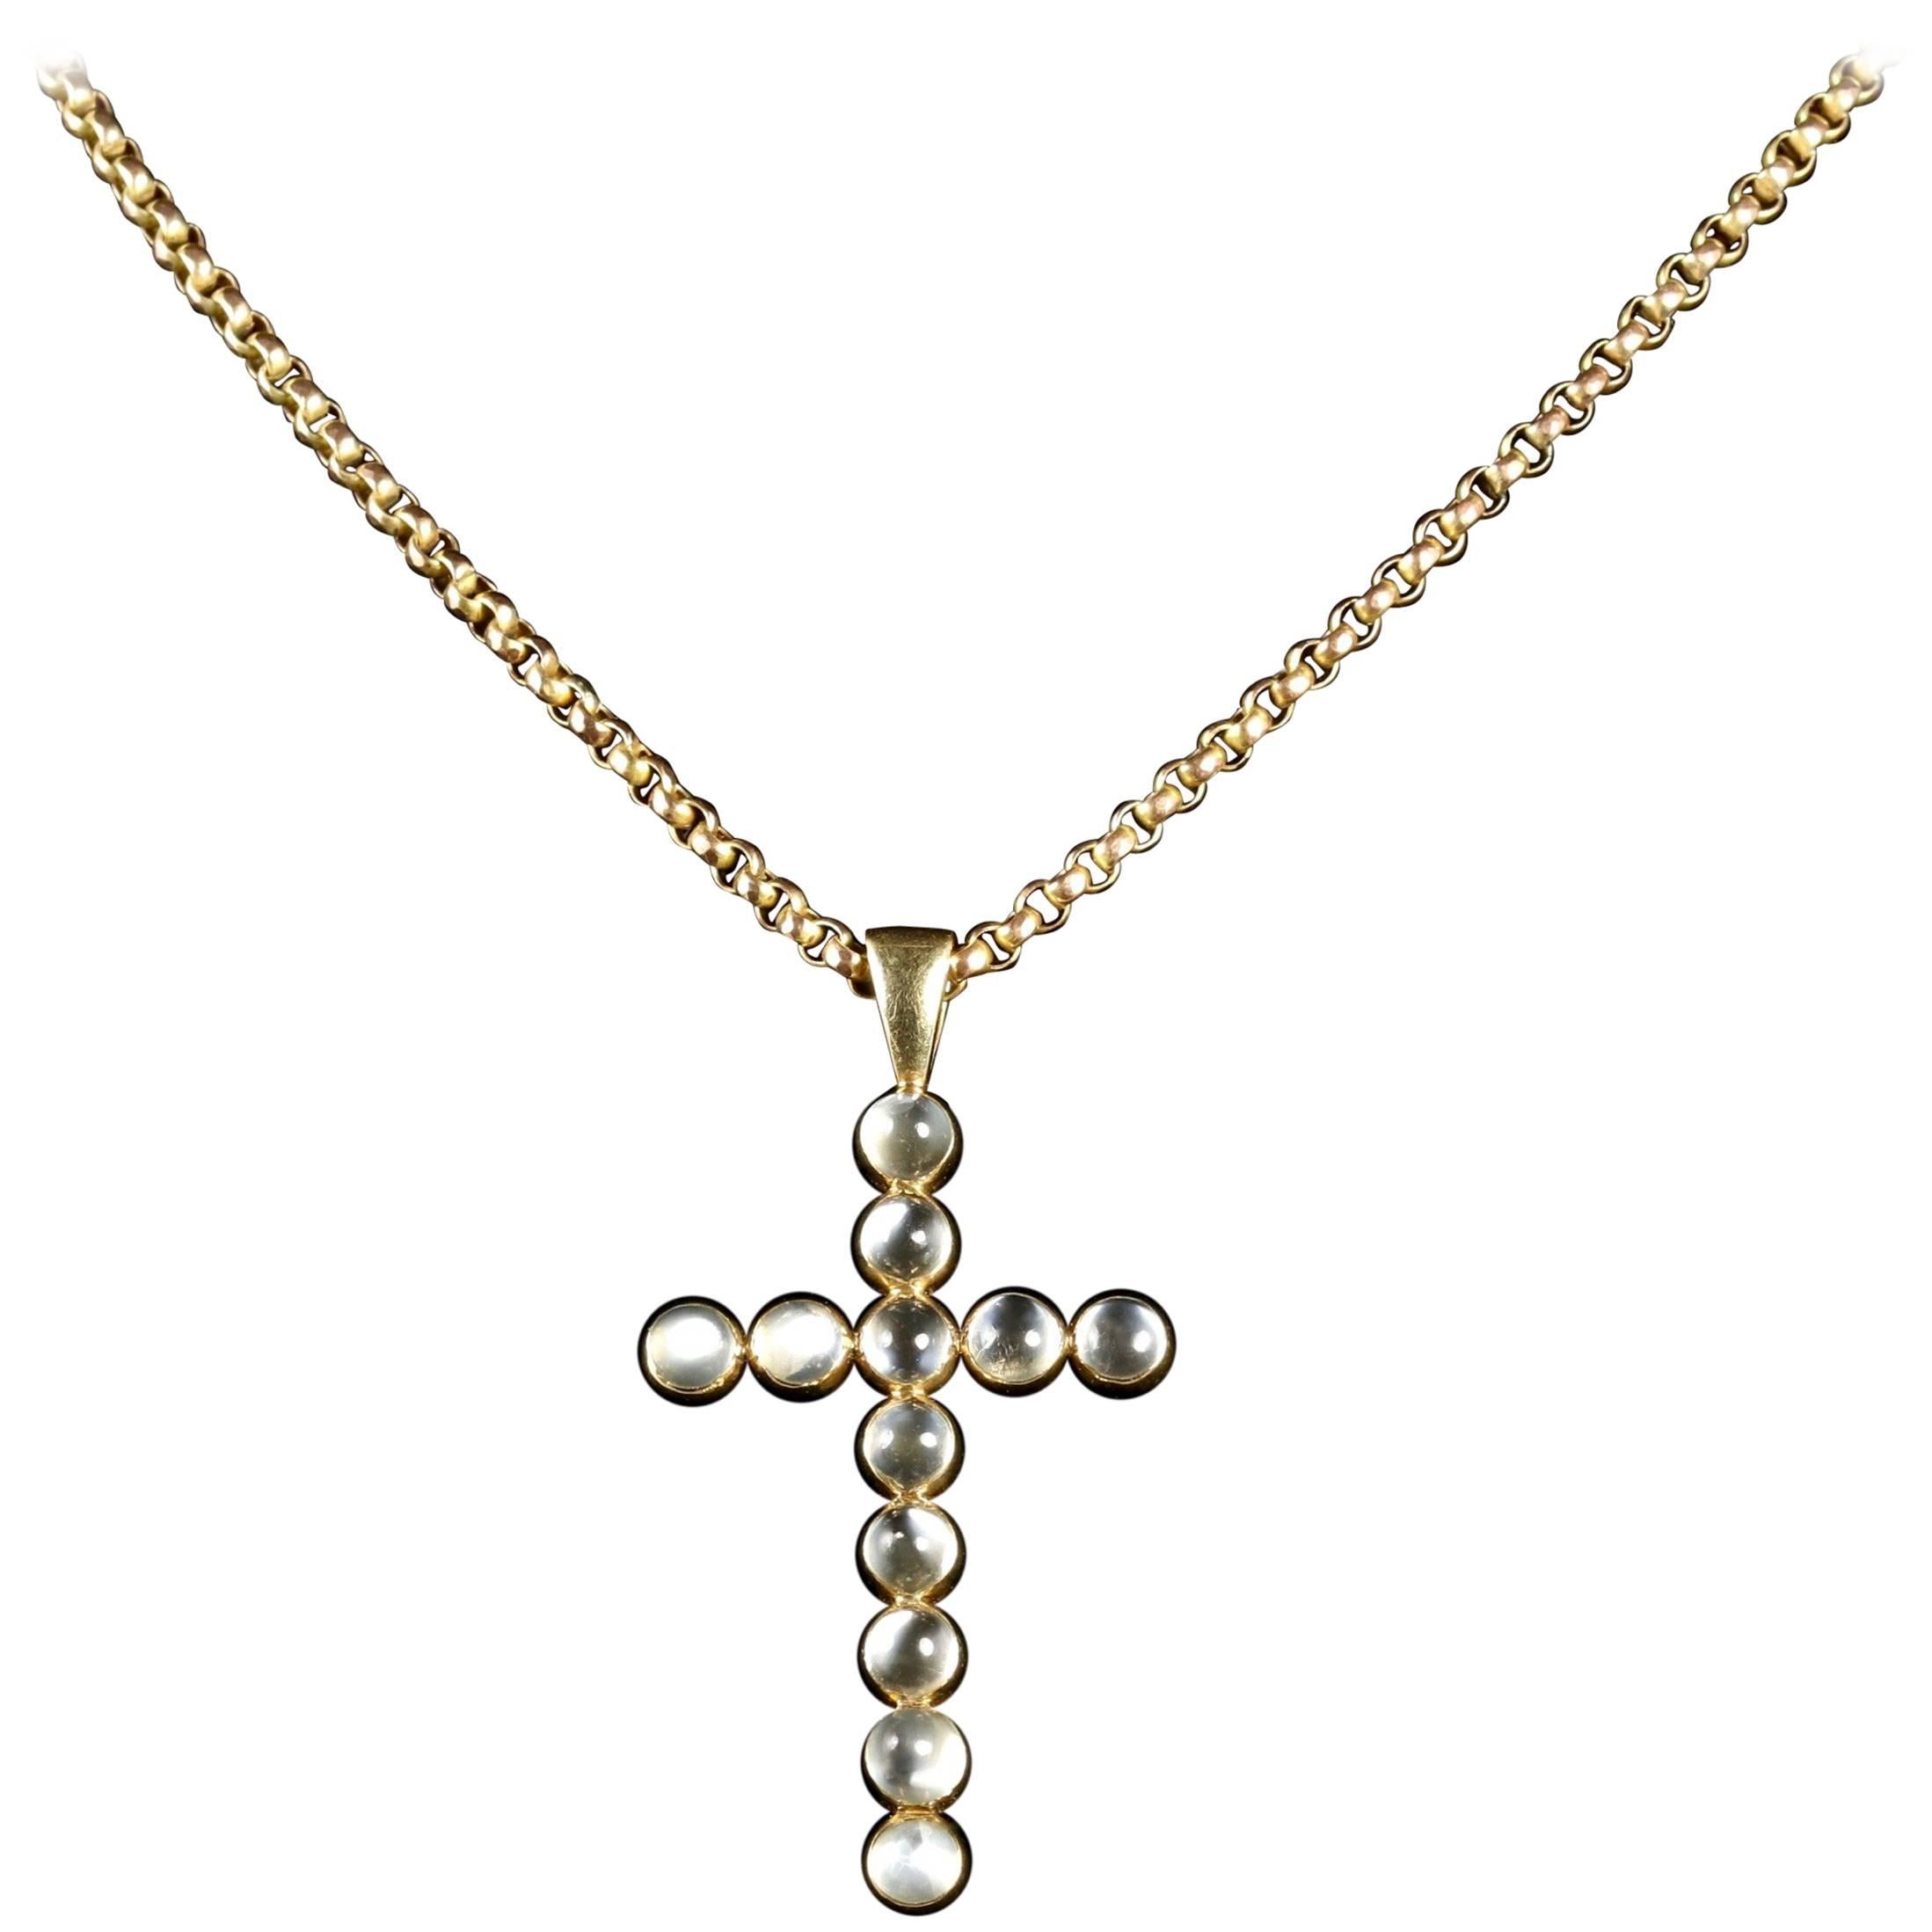 Antique Victorian Gold Moonstone Cross and Gold Necklace, circa 1900